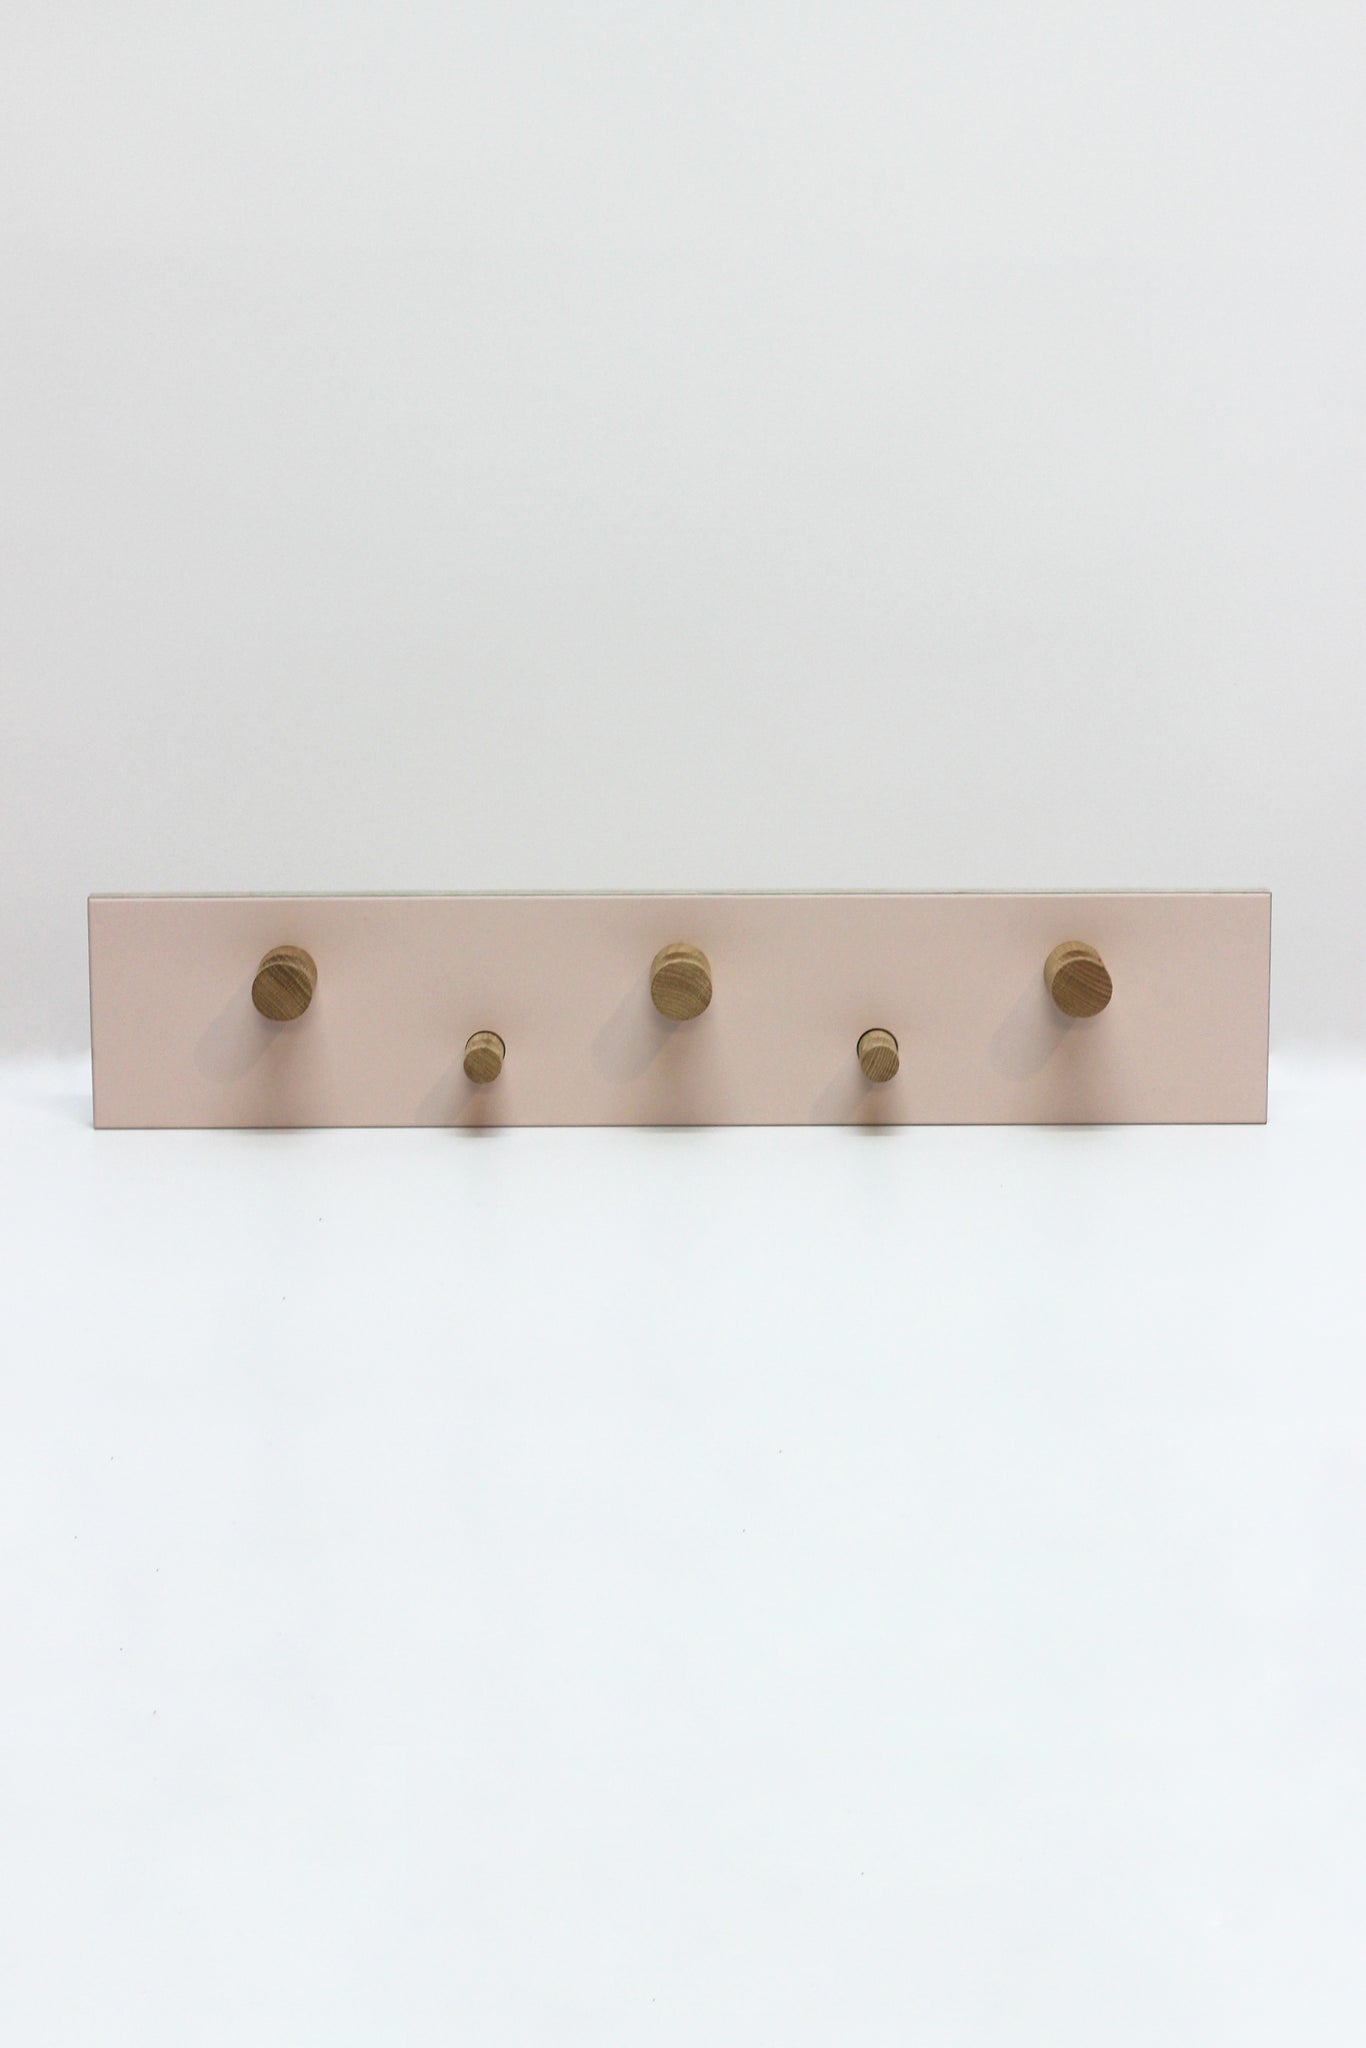 Colourful handmade solid oak coat hooks with Forbo linoleum top. Made by Jon Grant London in Leyton, East London.